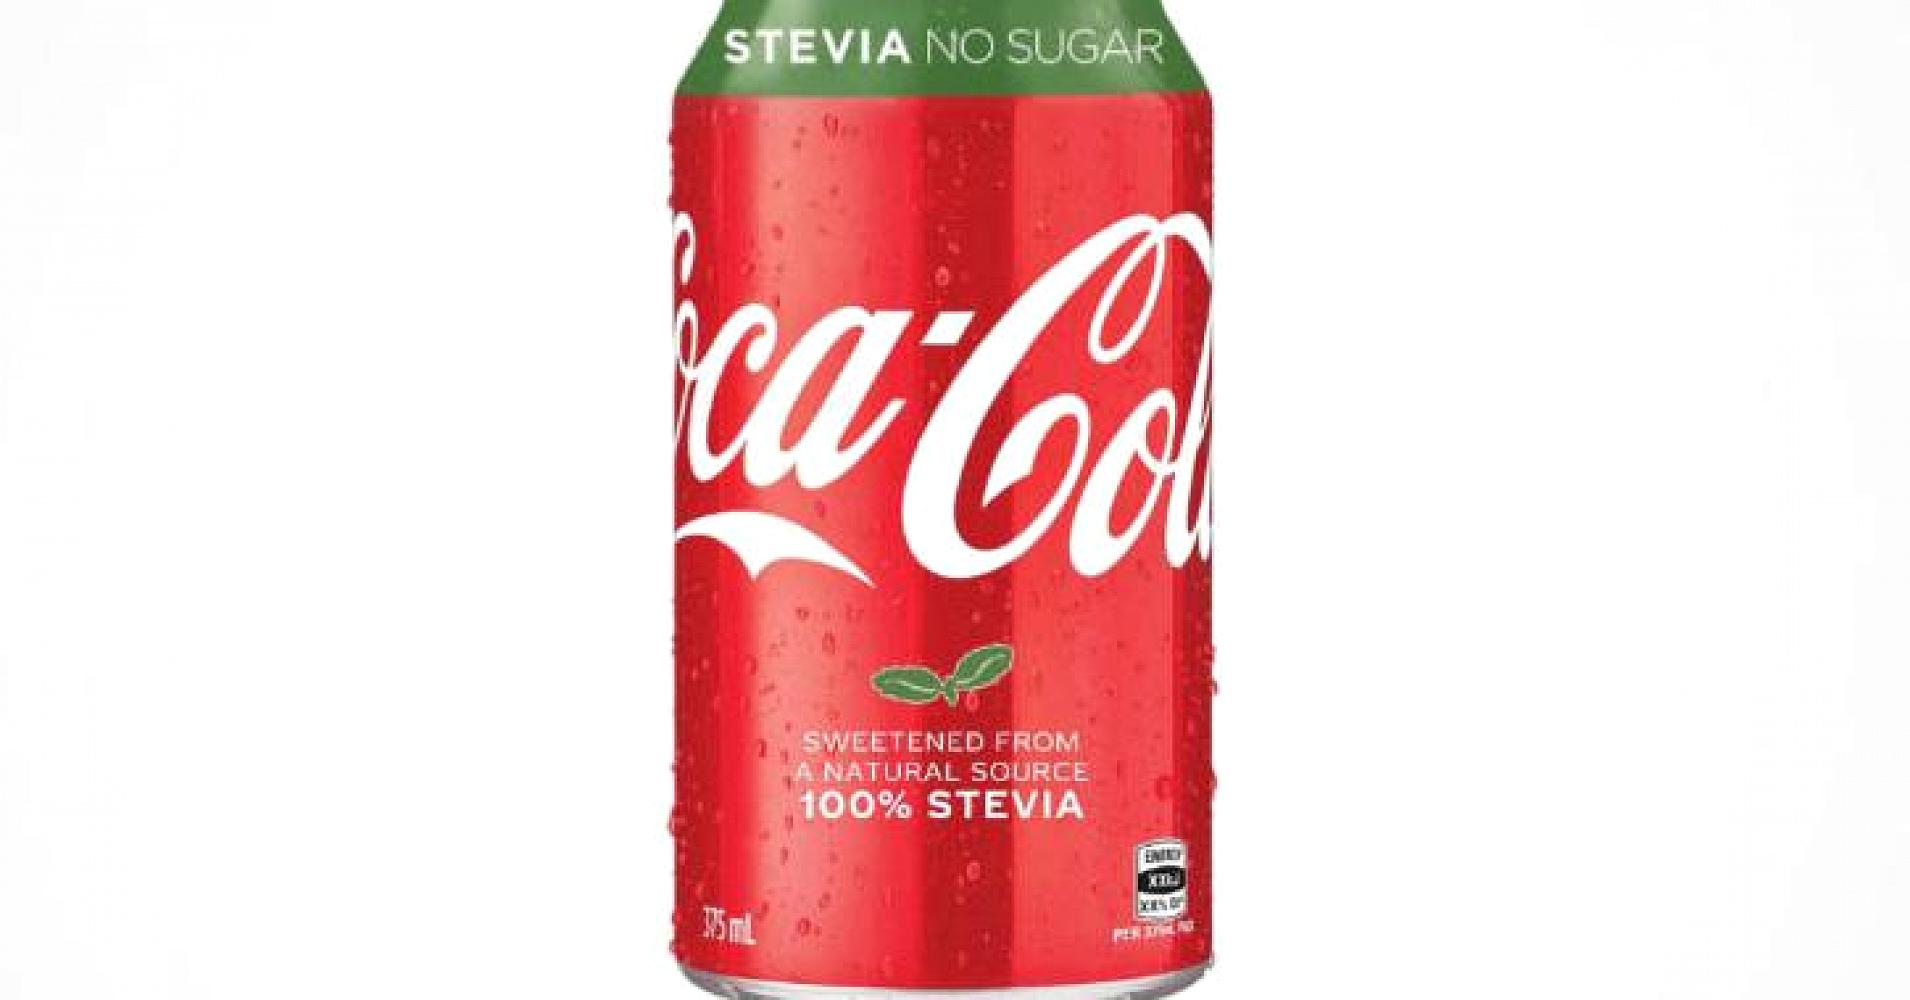 Coca Cola Finally Launches Their Patented No Sugar Stevia Sweetened Coke